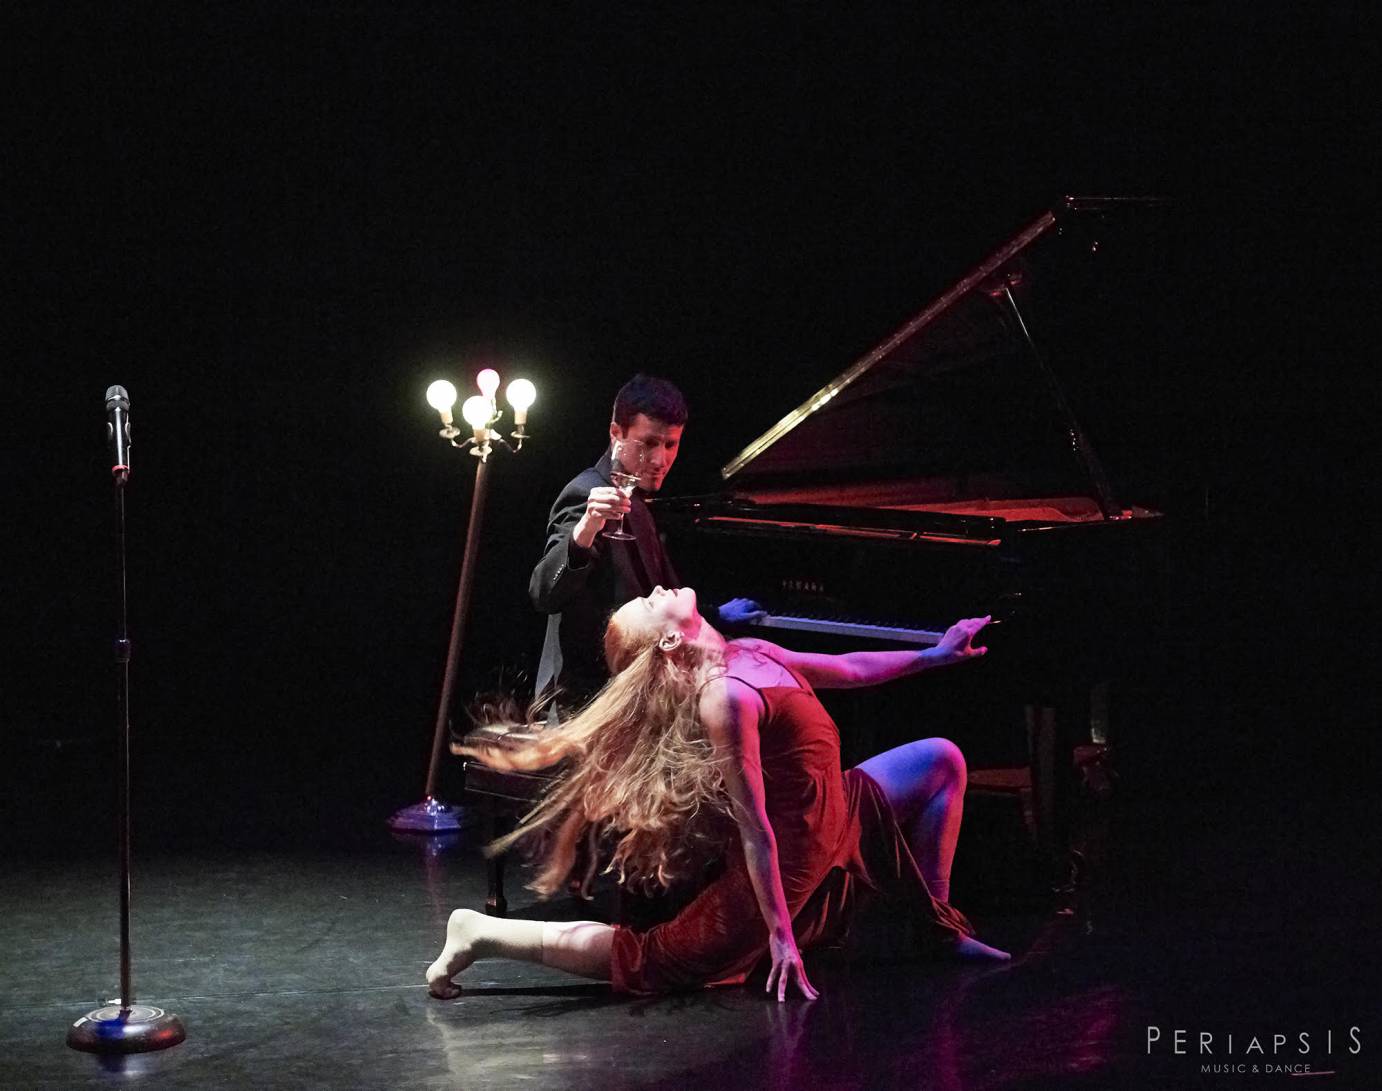 A man at a piano offers a lunging woman wine